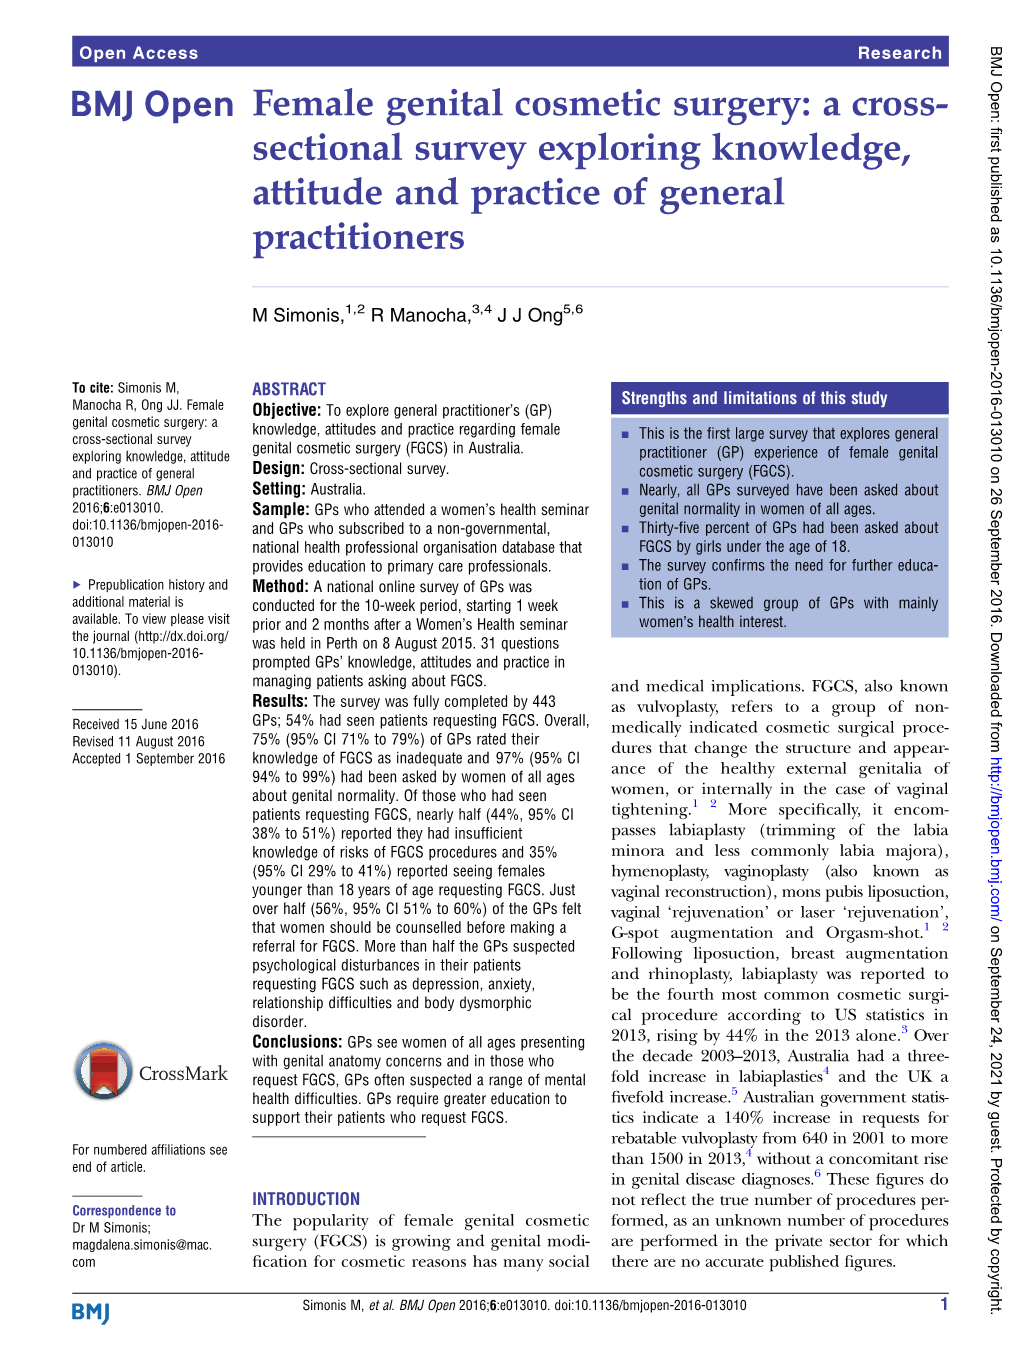 Female Genital Cosmetic Surgery: a Cross- Sectional Survey Exploring Knowledge, Attitude and Practice of General Practitioners